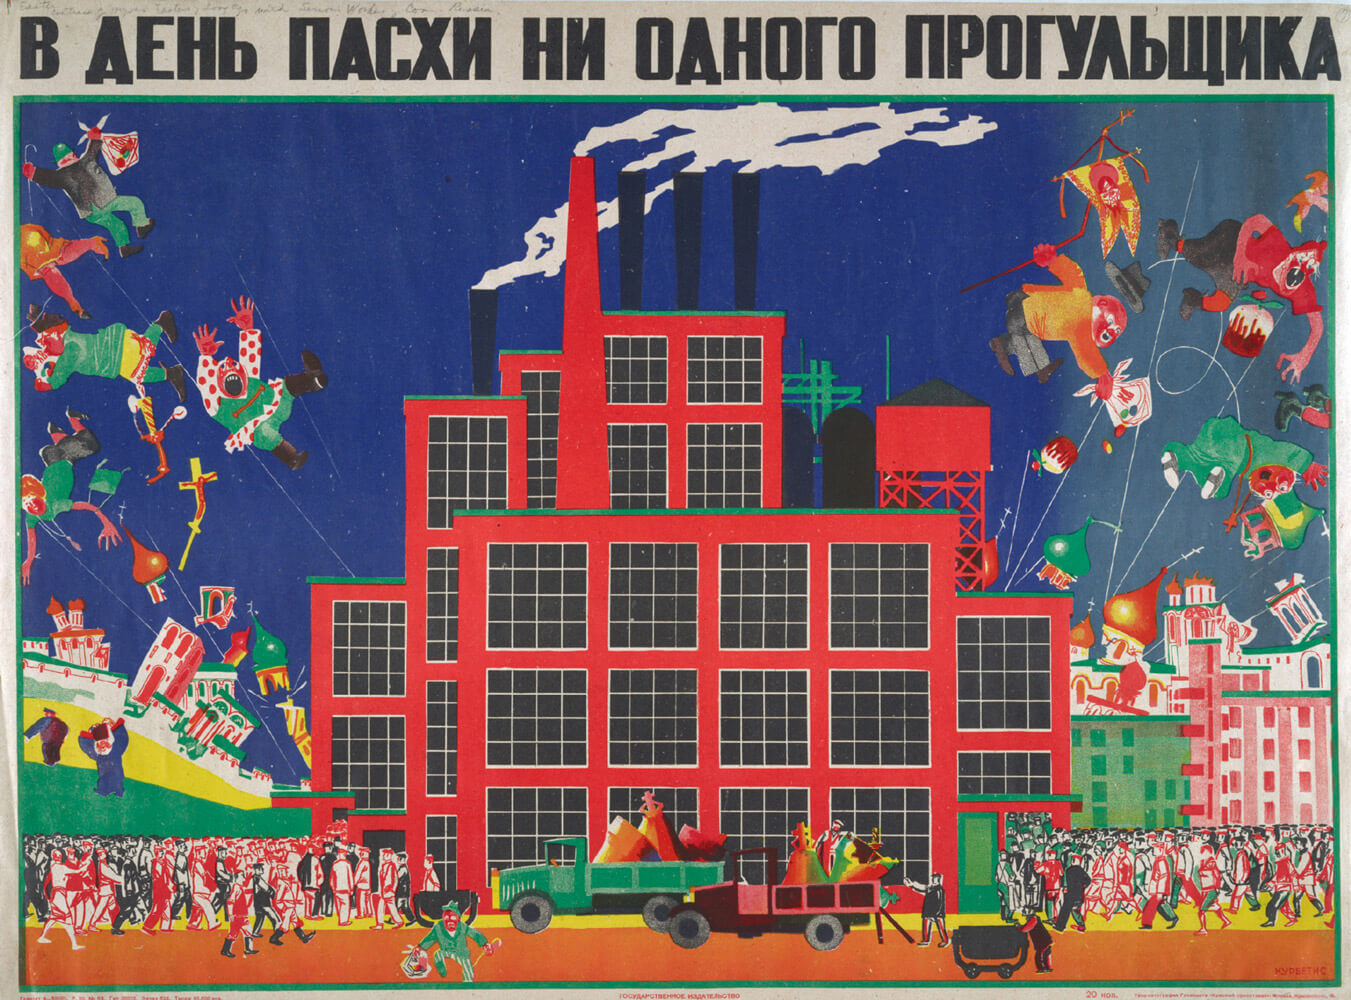 A nineteen twenties poster contrasting frivolous celebrations of Easter in the past with the commitment of the new Communist worker in a factory.